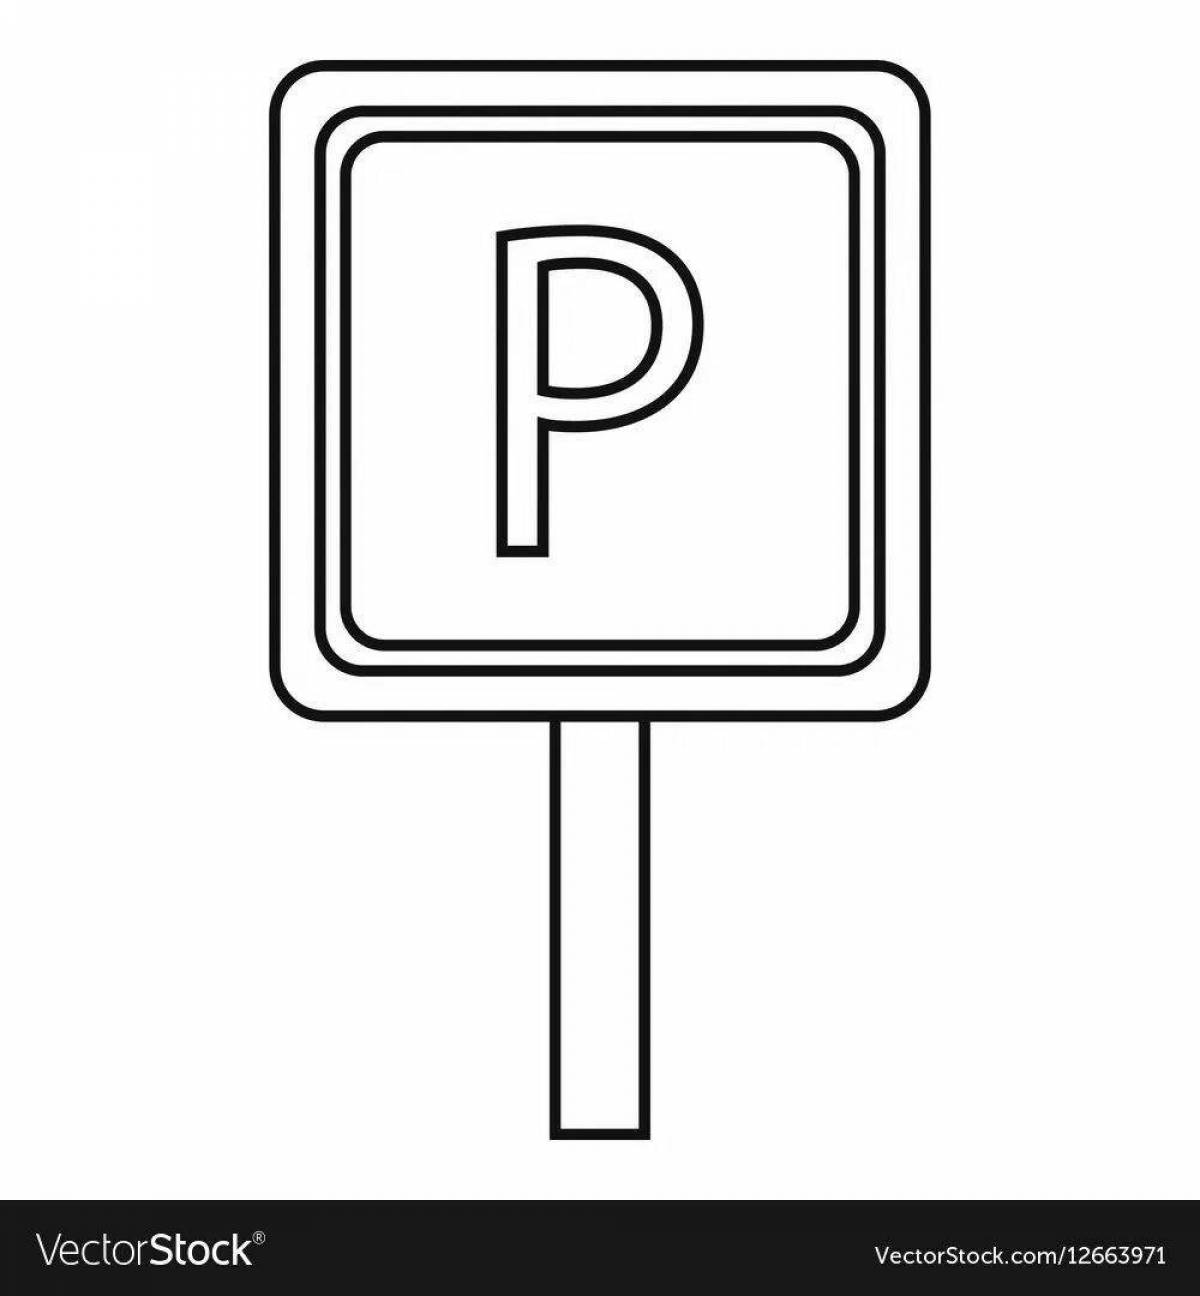 Funny parking lot coloring page